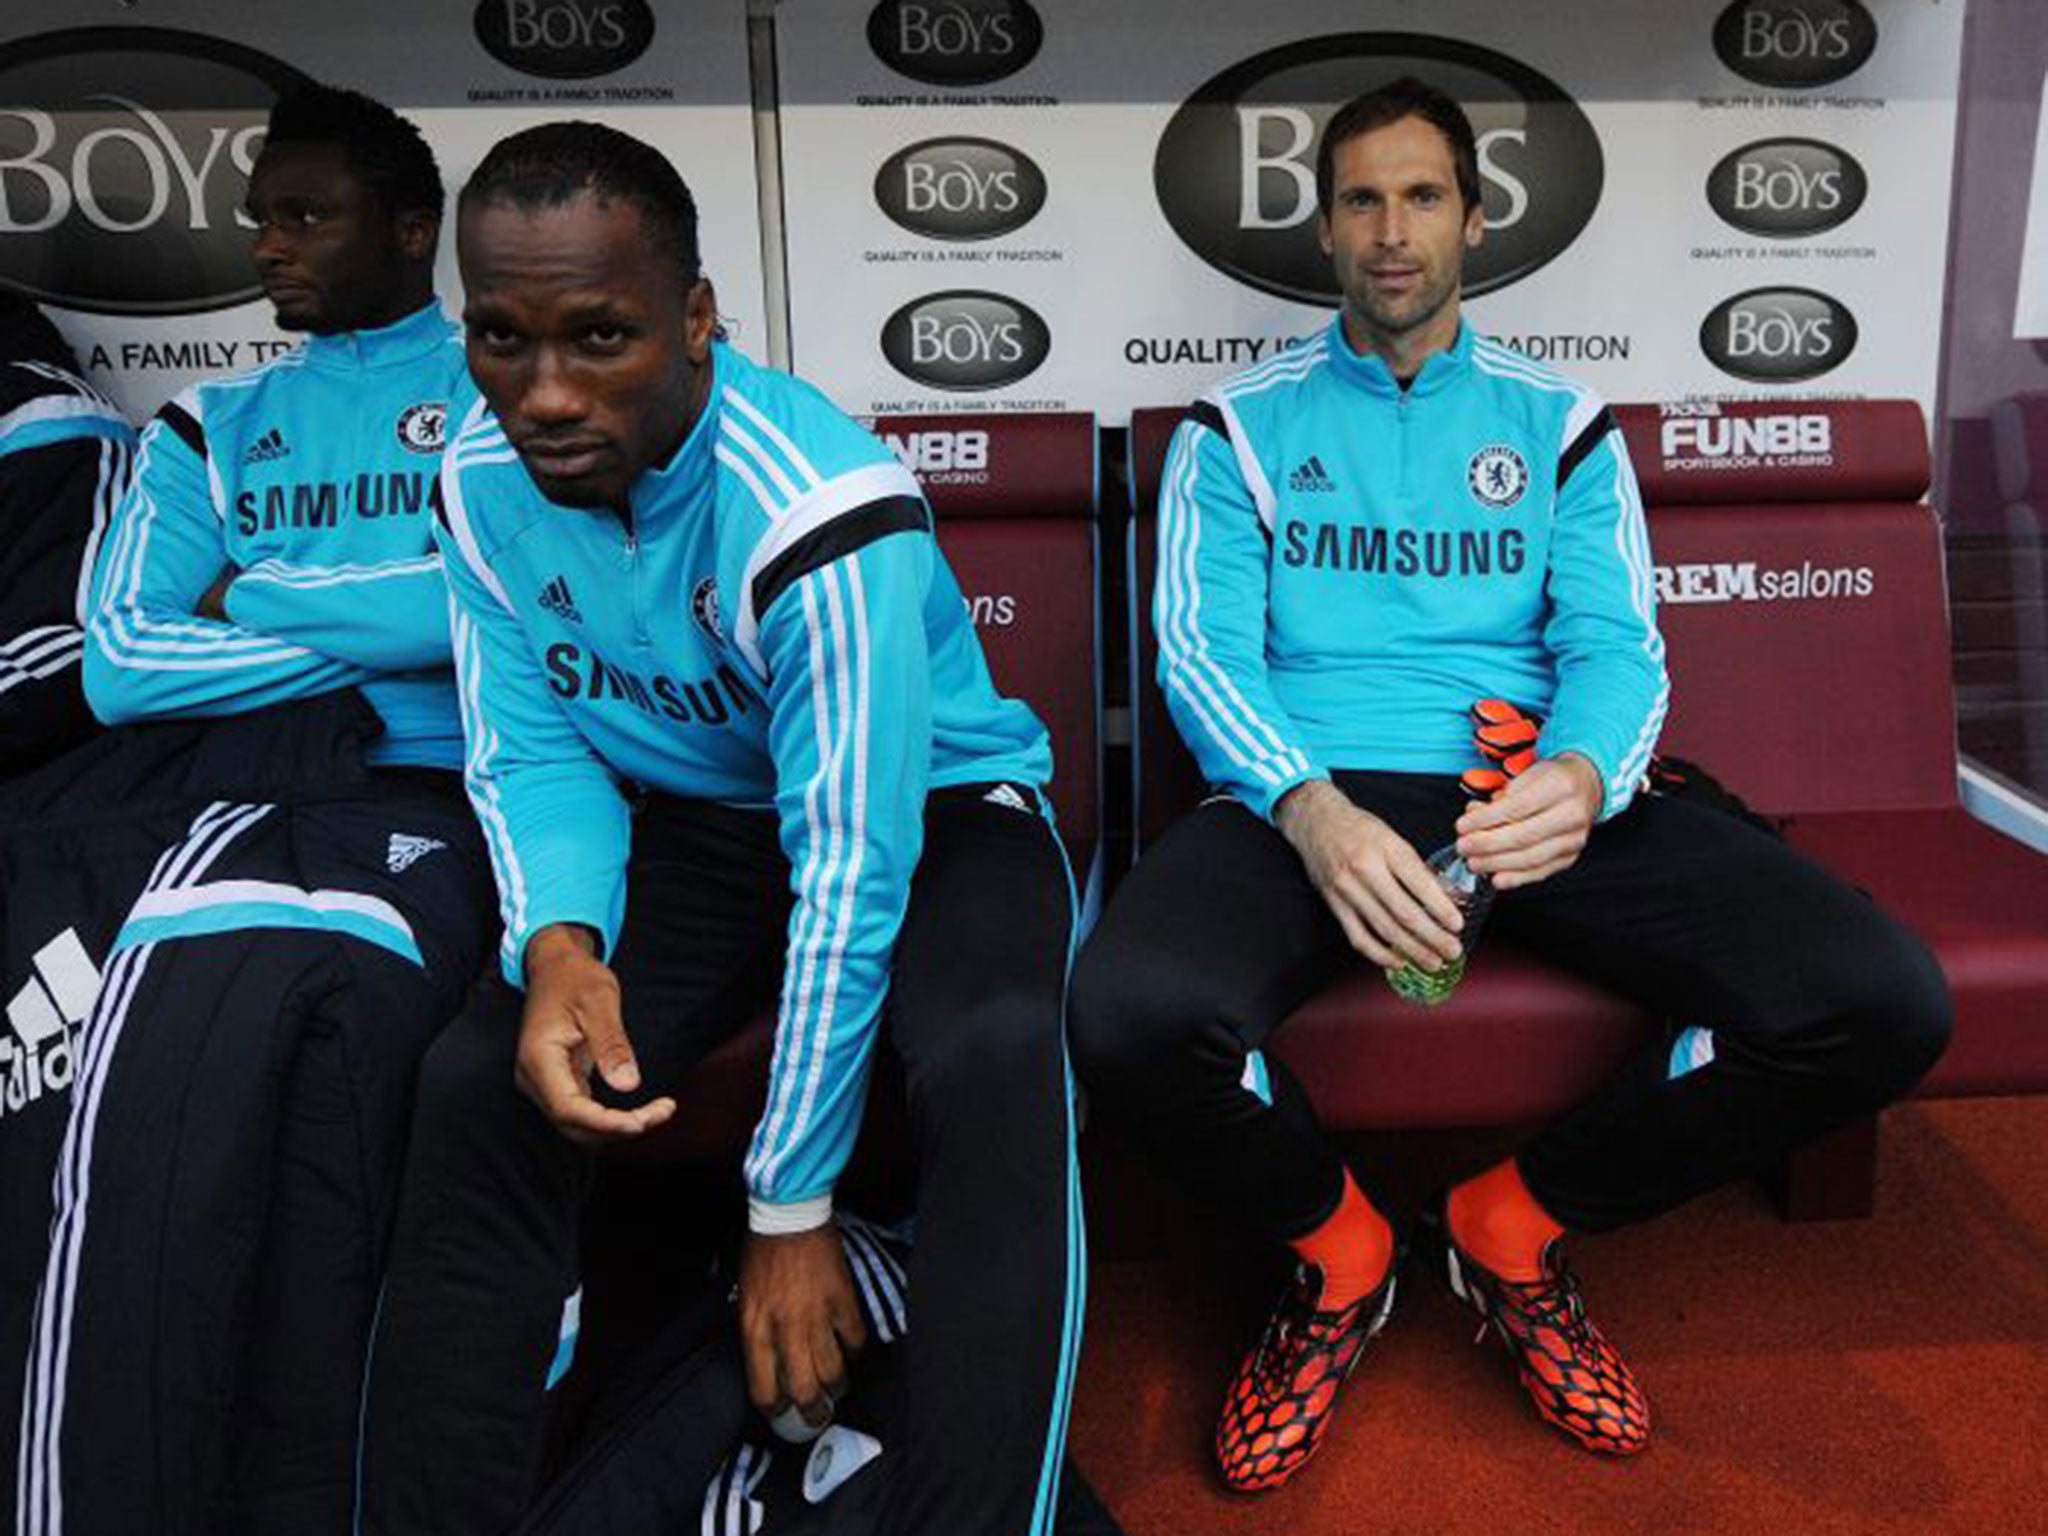 Petr Cech (right) and Chelsea's Didier Drogba (left) sit on the bench before the match between Burnley and Chelsea on Monday